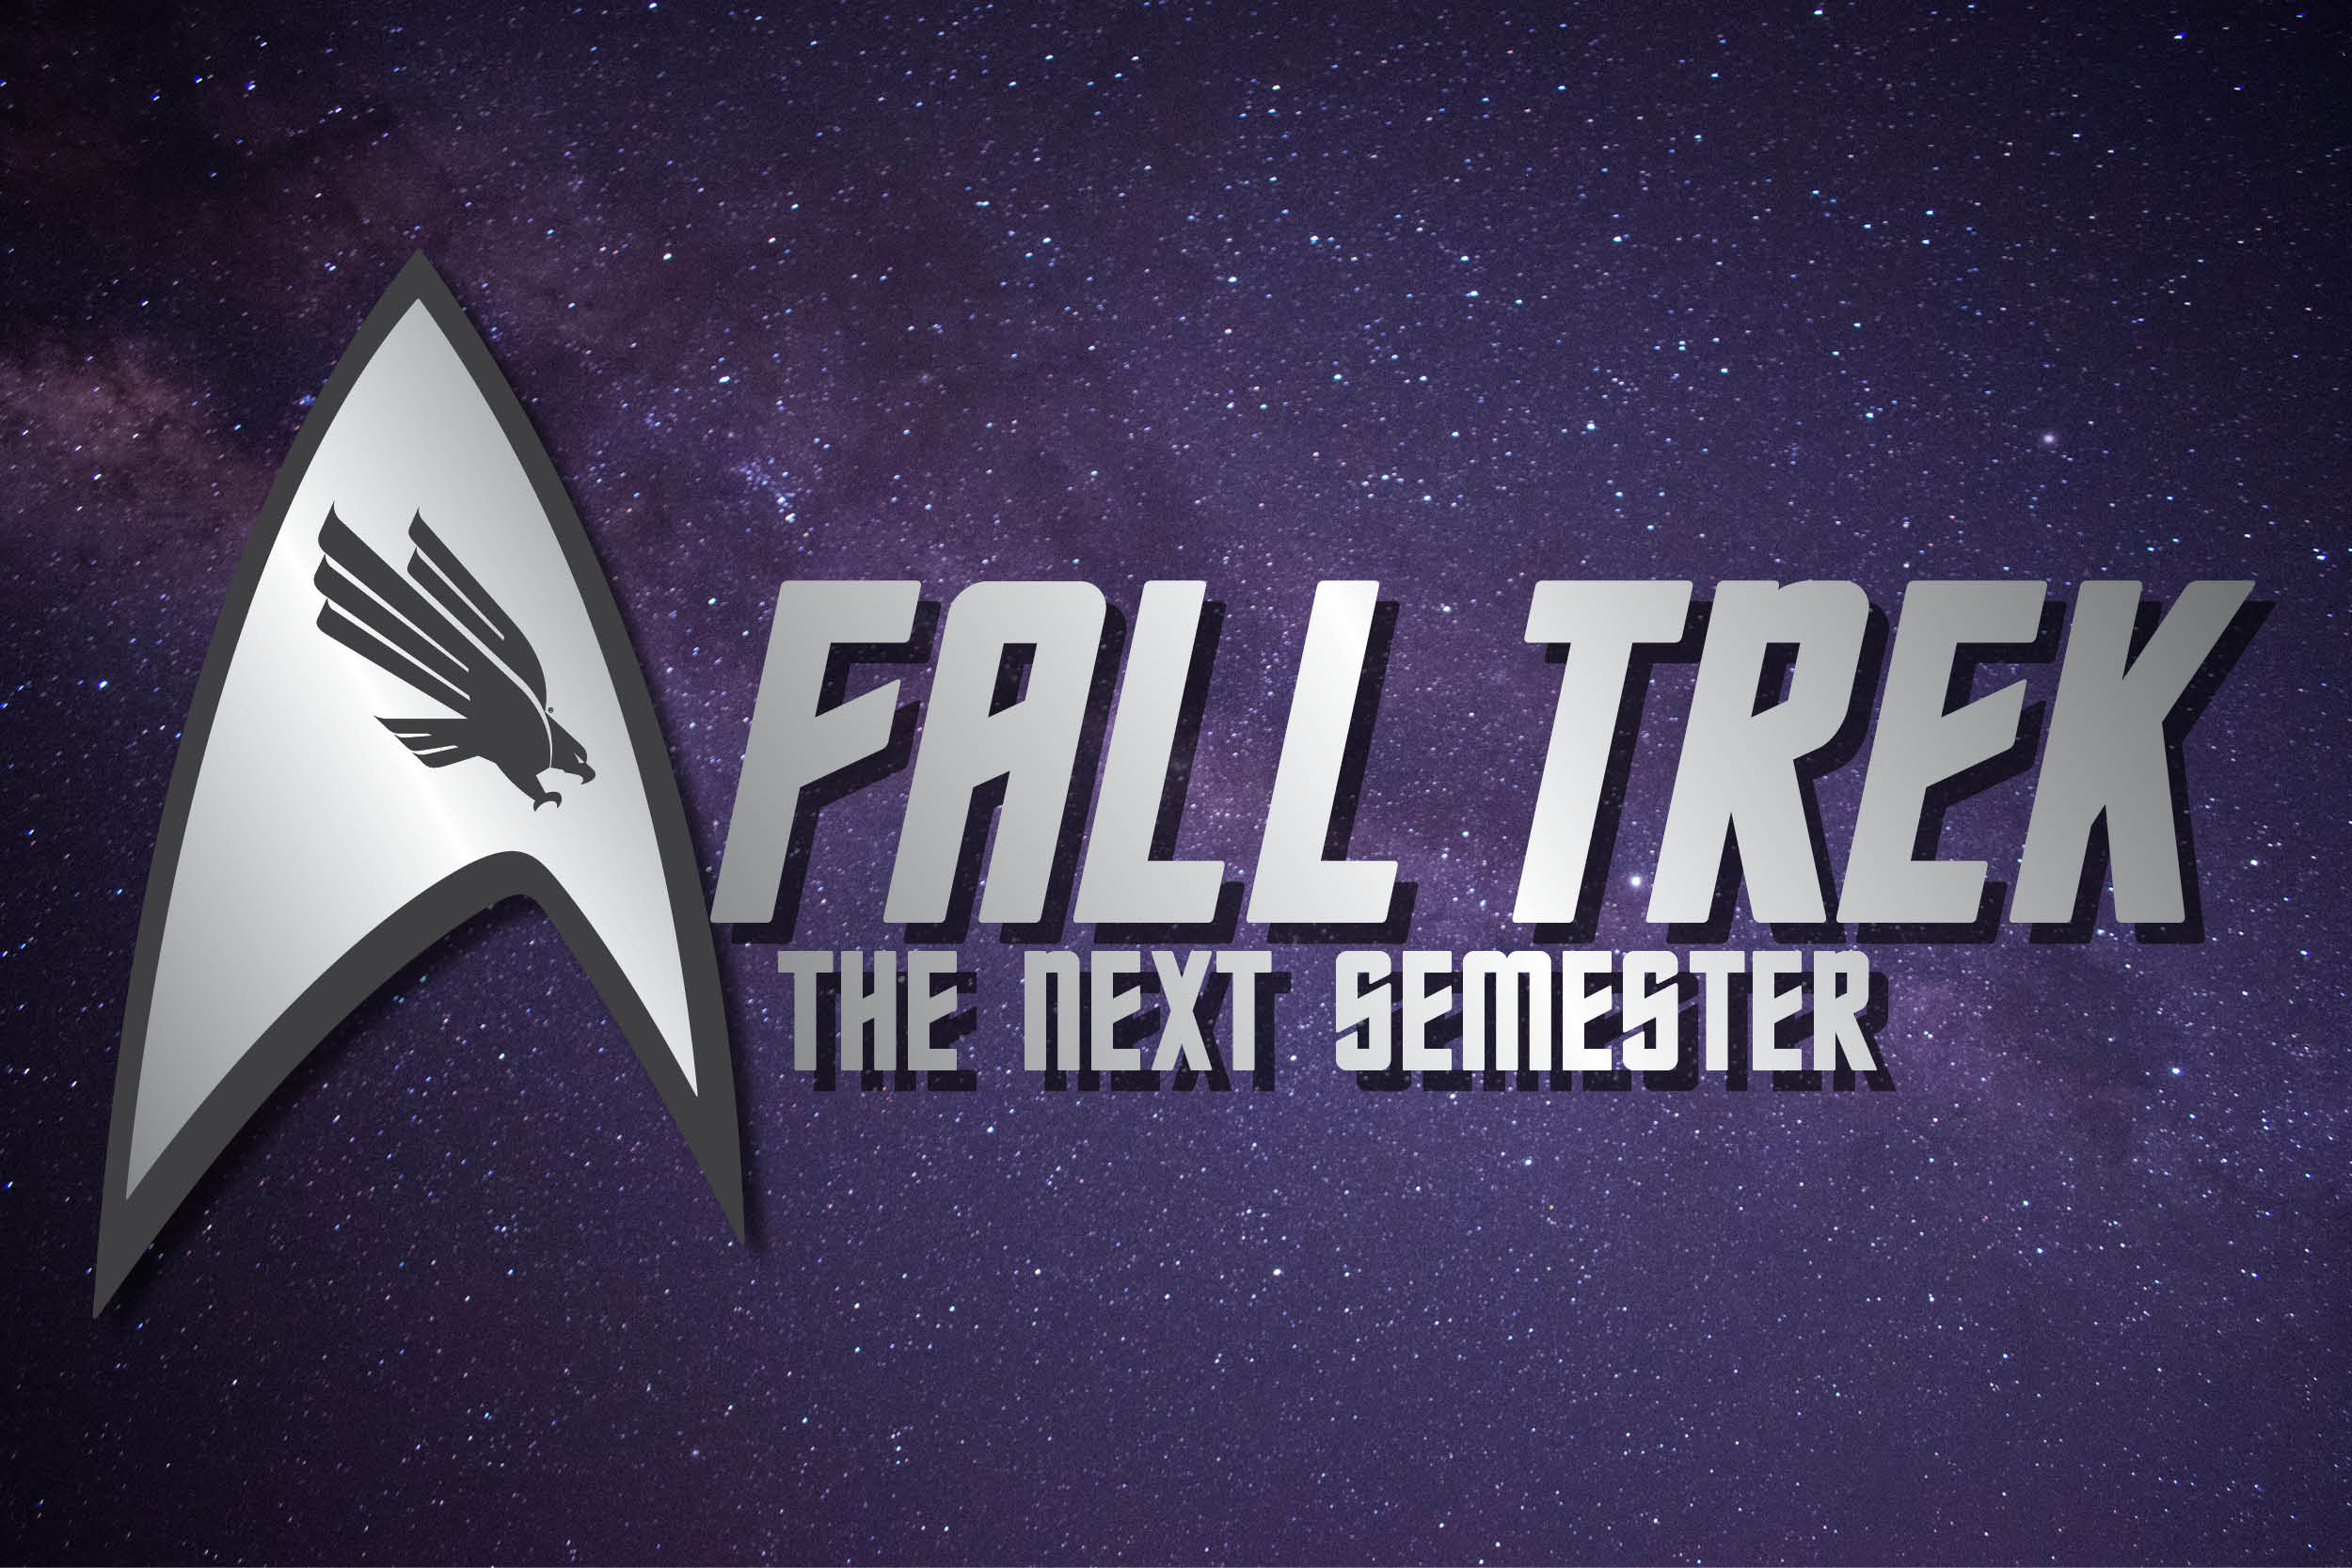 Purple galaxy that has the Star Trek logo and a falling eagle and states "Fall Trek: The Next Semester"